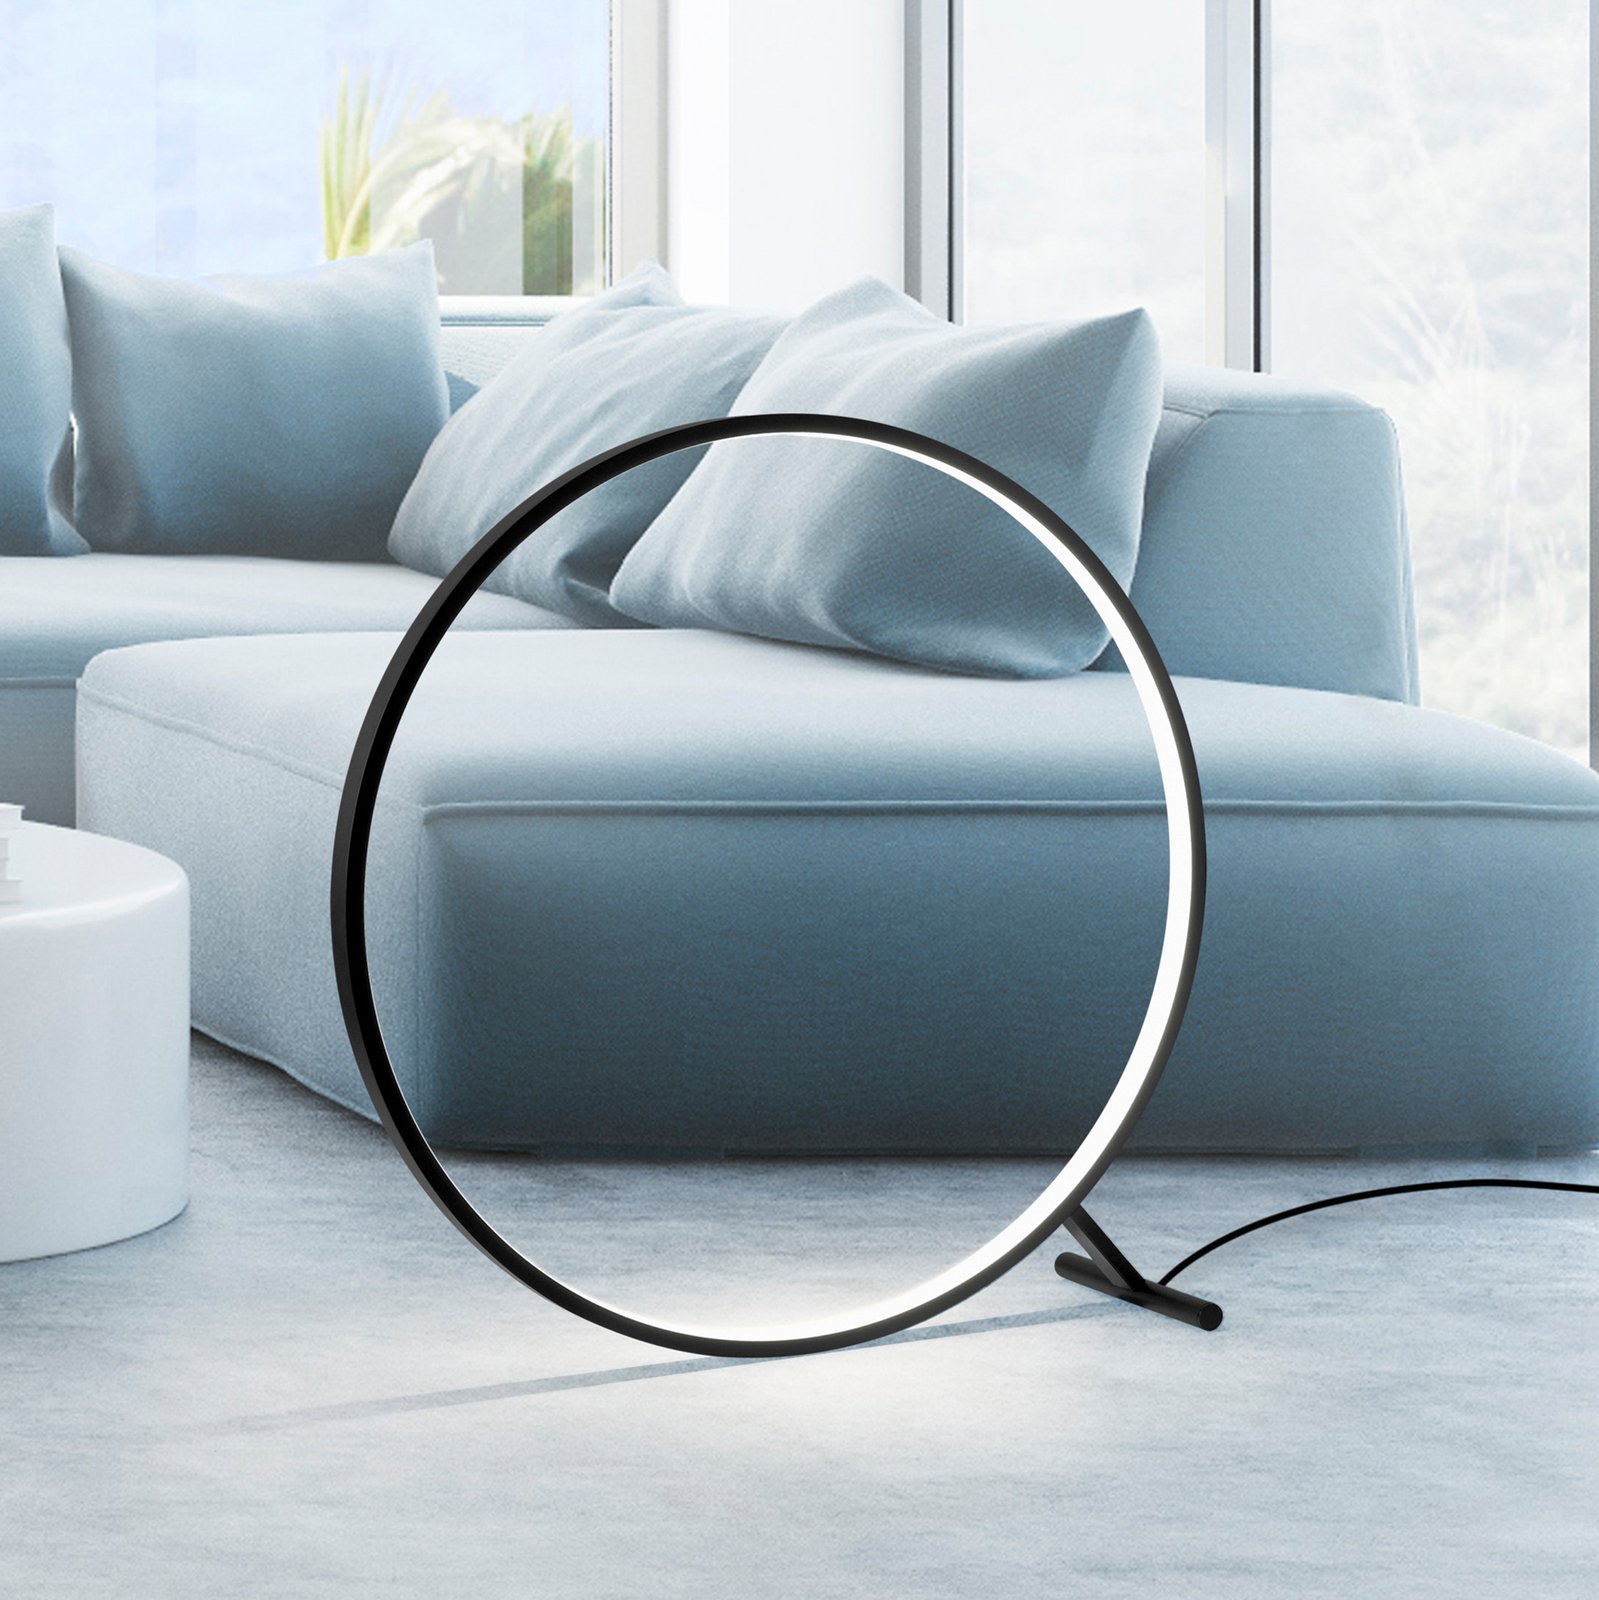 LED floor lamp Hula CCT with remote control Ø 80 cm